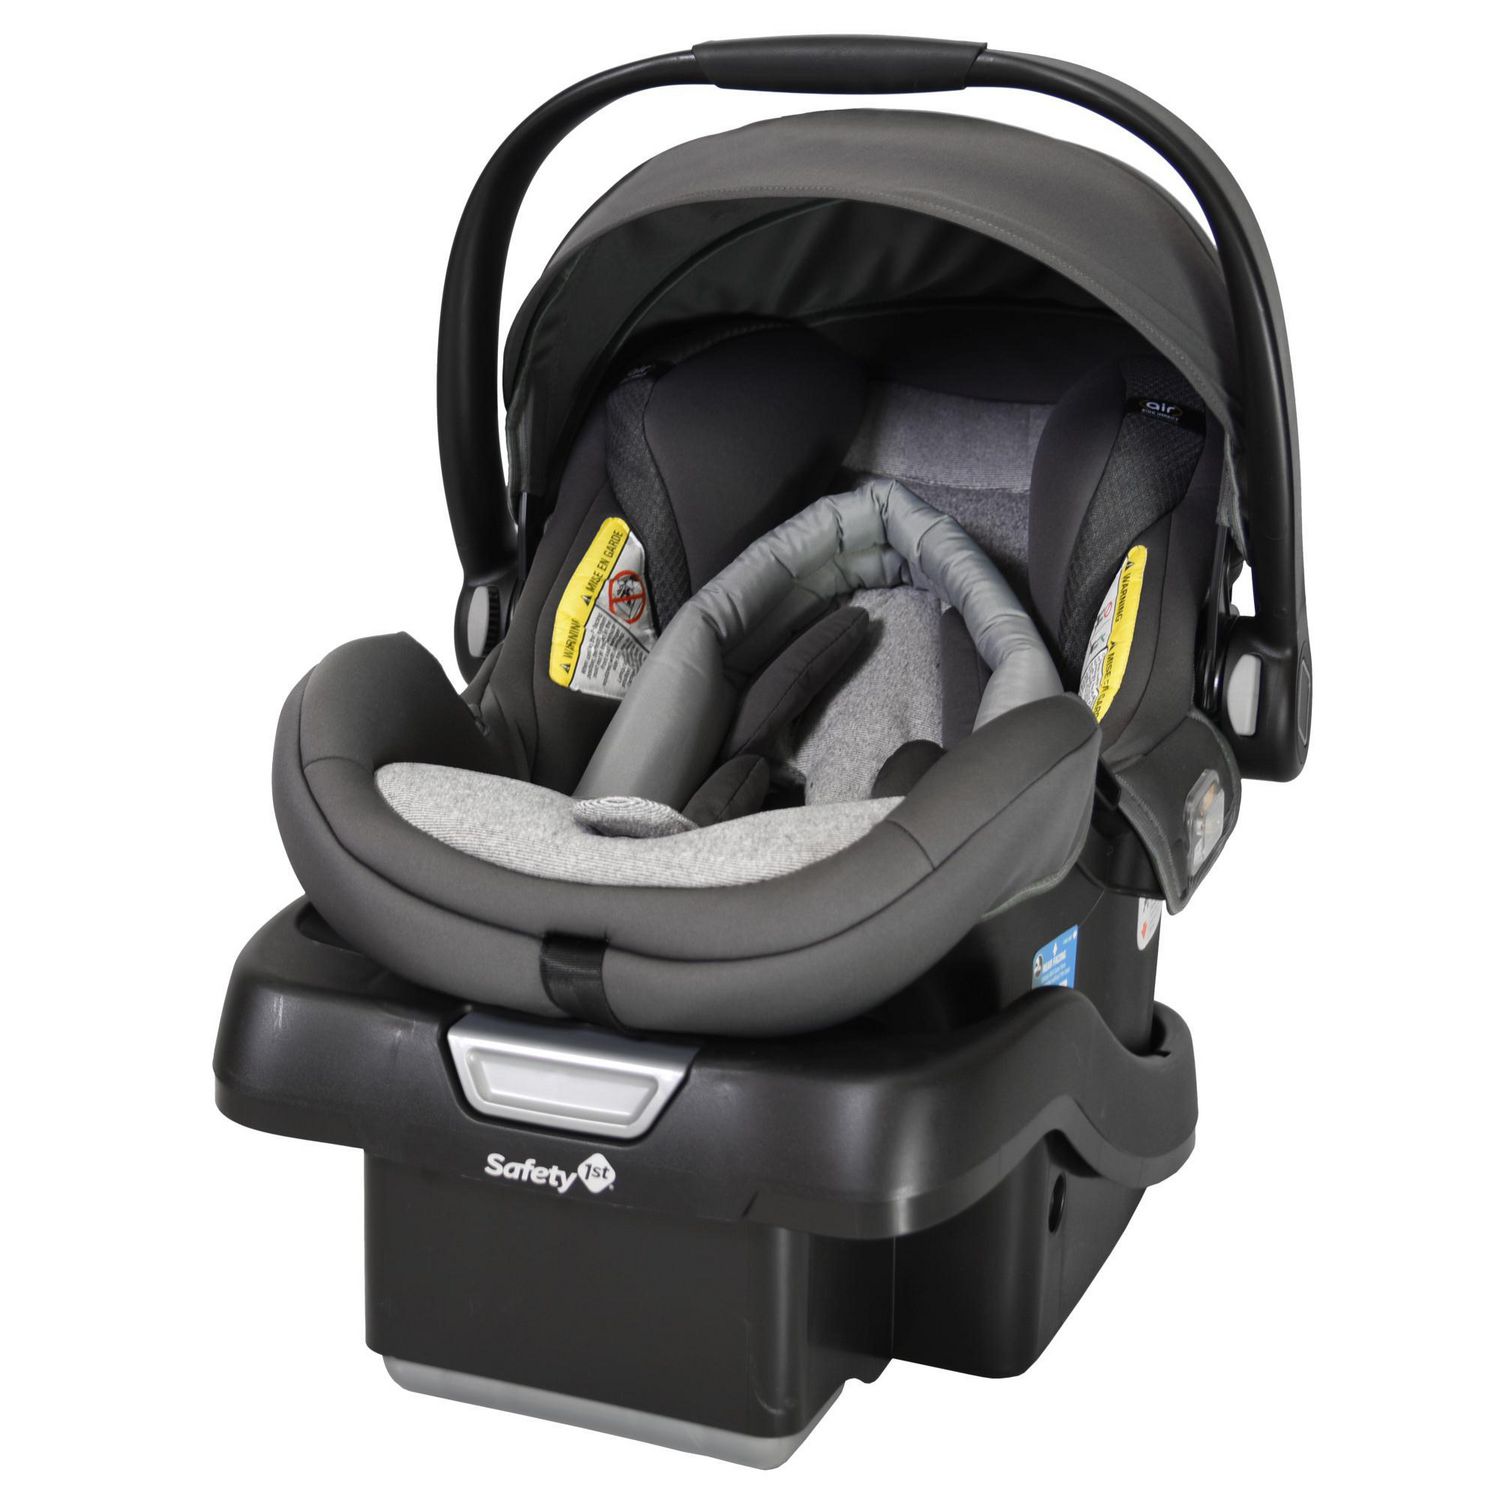 Safety 1st Onboard 35 Air Infant Car, Safety First Car Seat 4 In 1